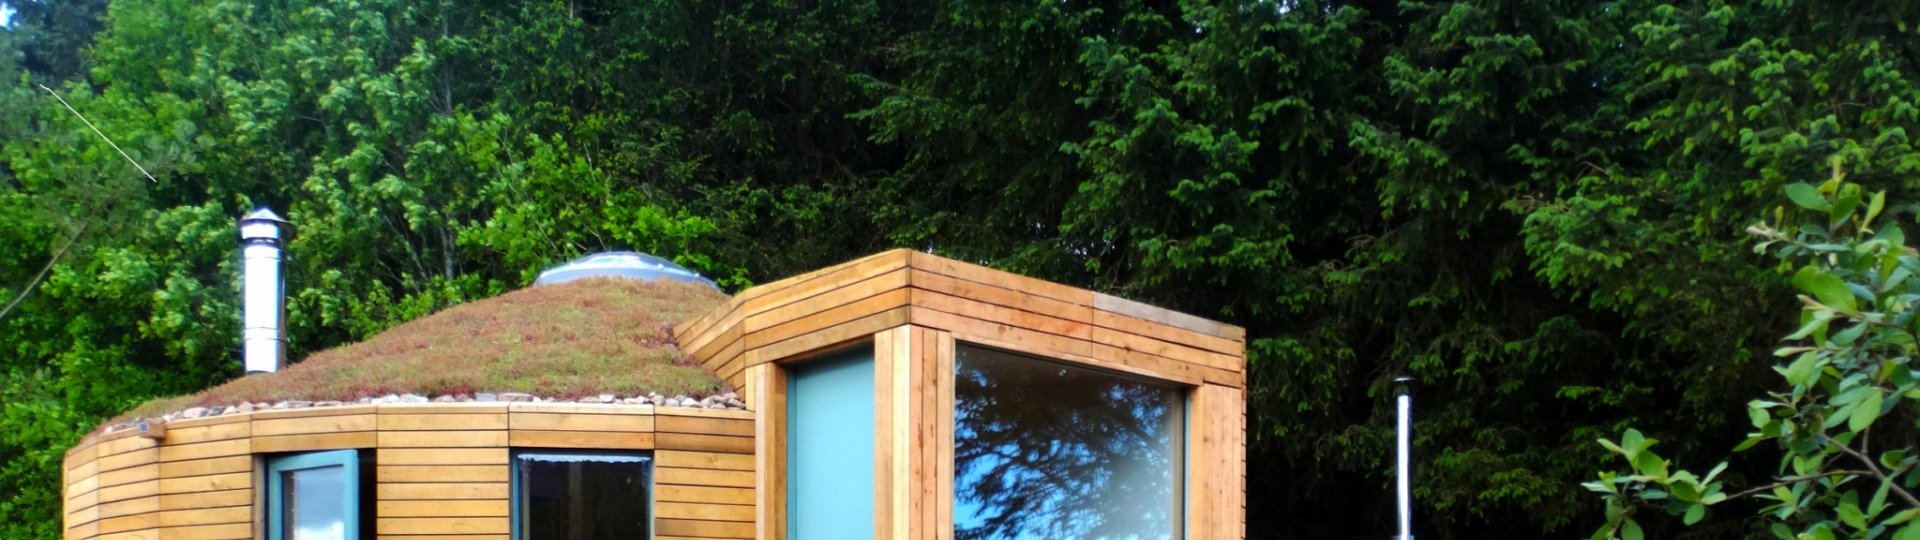 An image showing the exterior of Otter Yurt Lodge at Loch Ken Eco Bothies self catering accommodatio